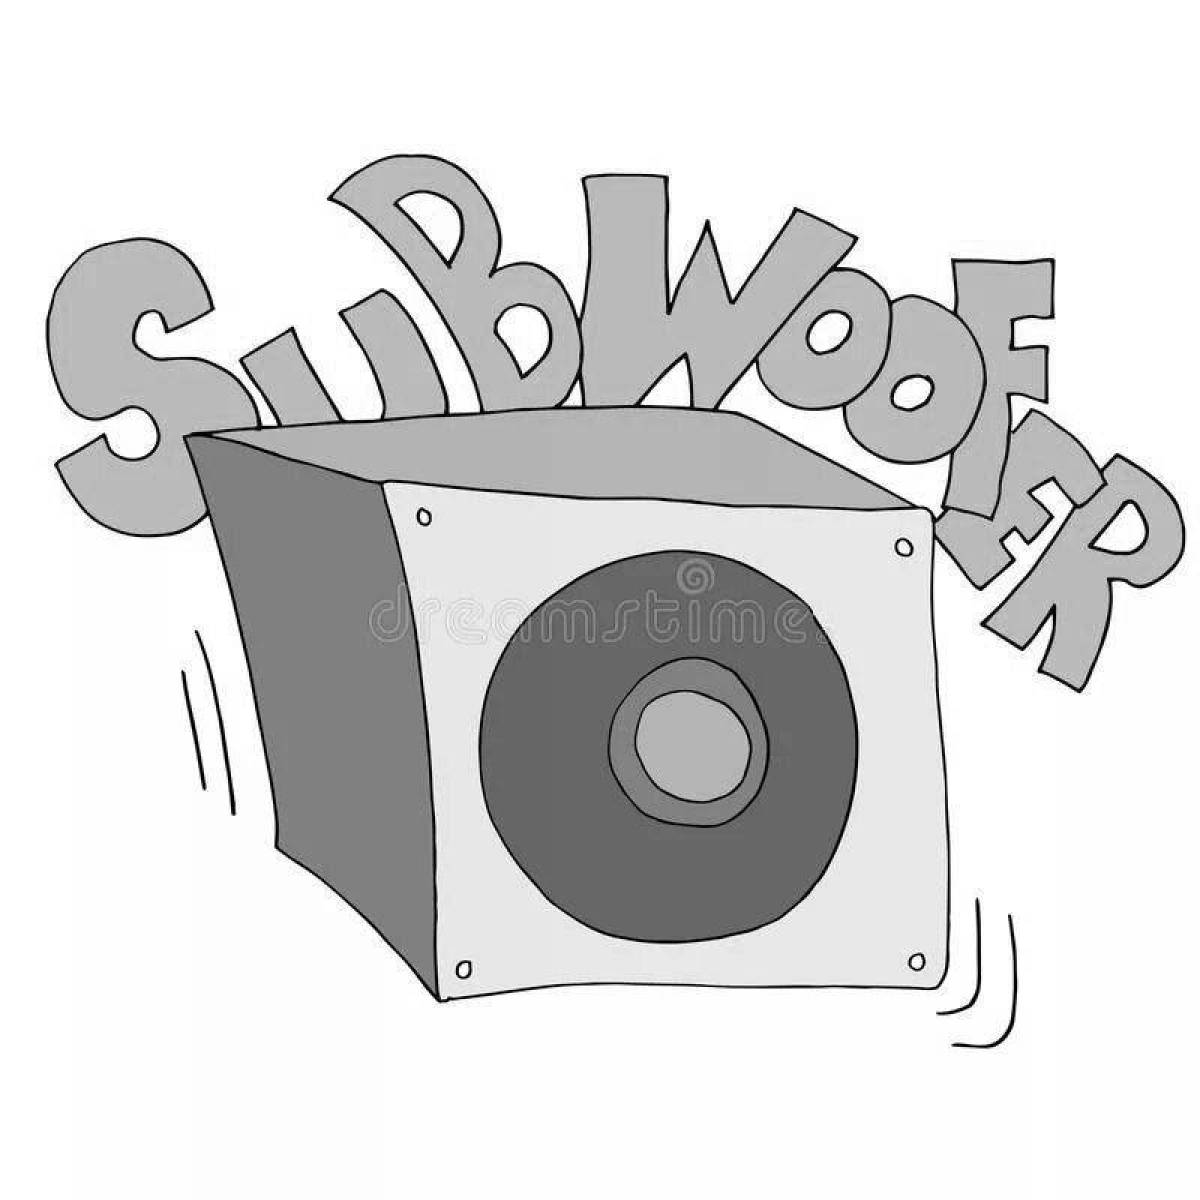 Charming subwoofer coloring